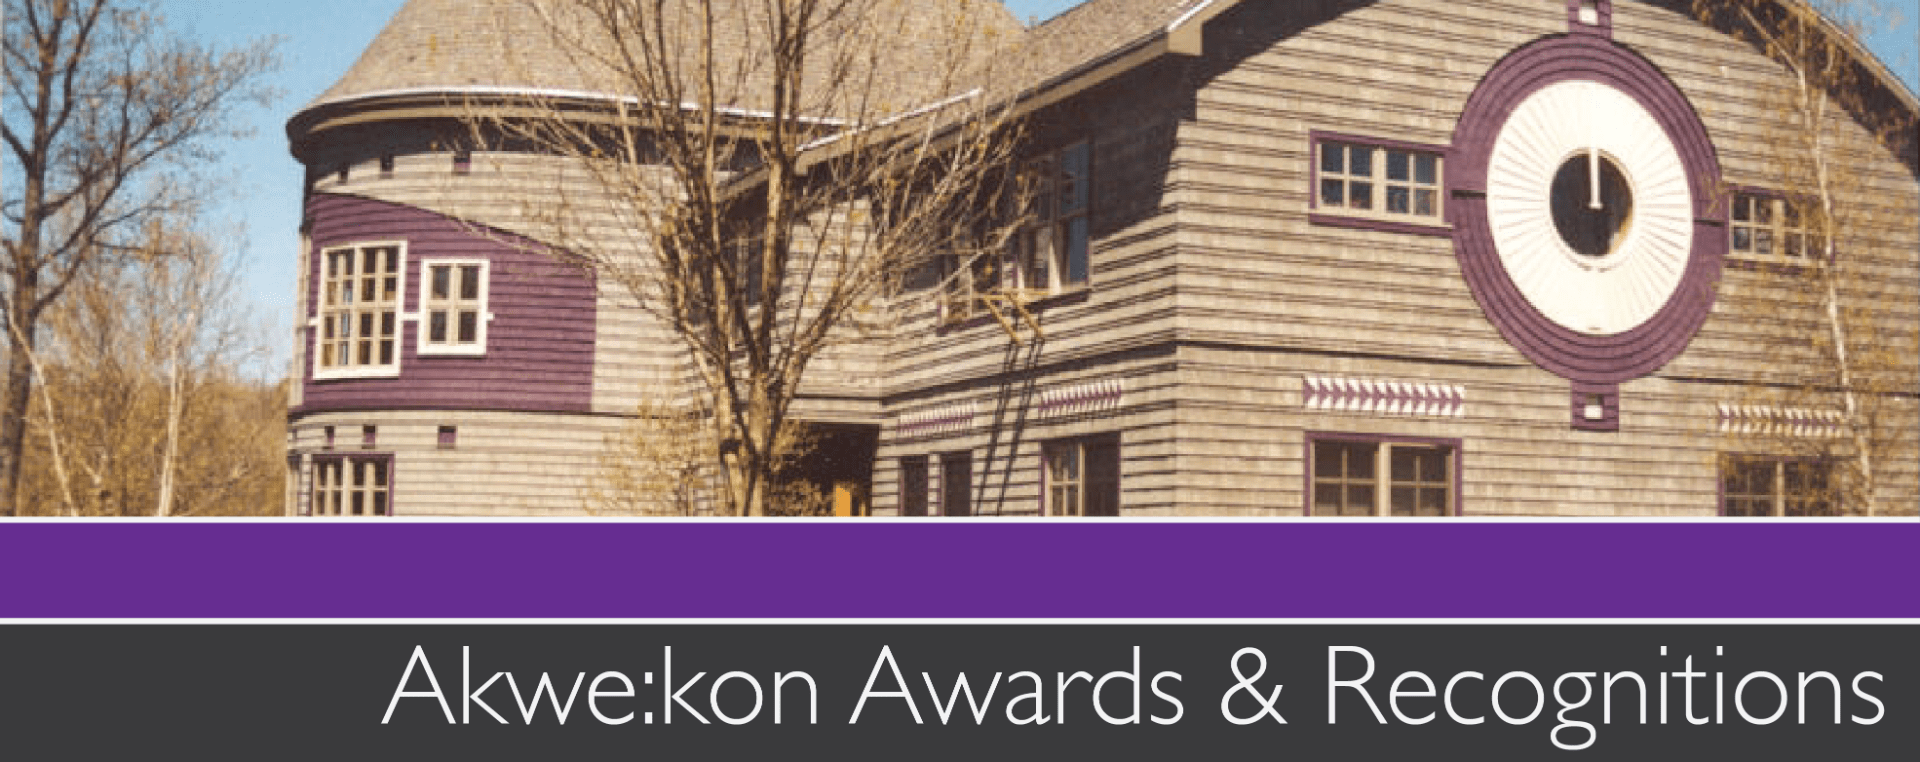 Banner with a picture of a large gray building with a circular window and text underneath which says Akwekon awards and recognitions.